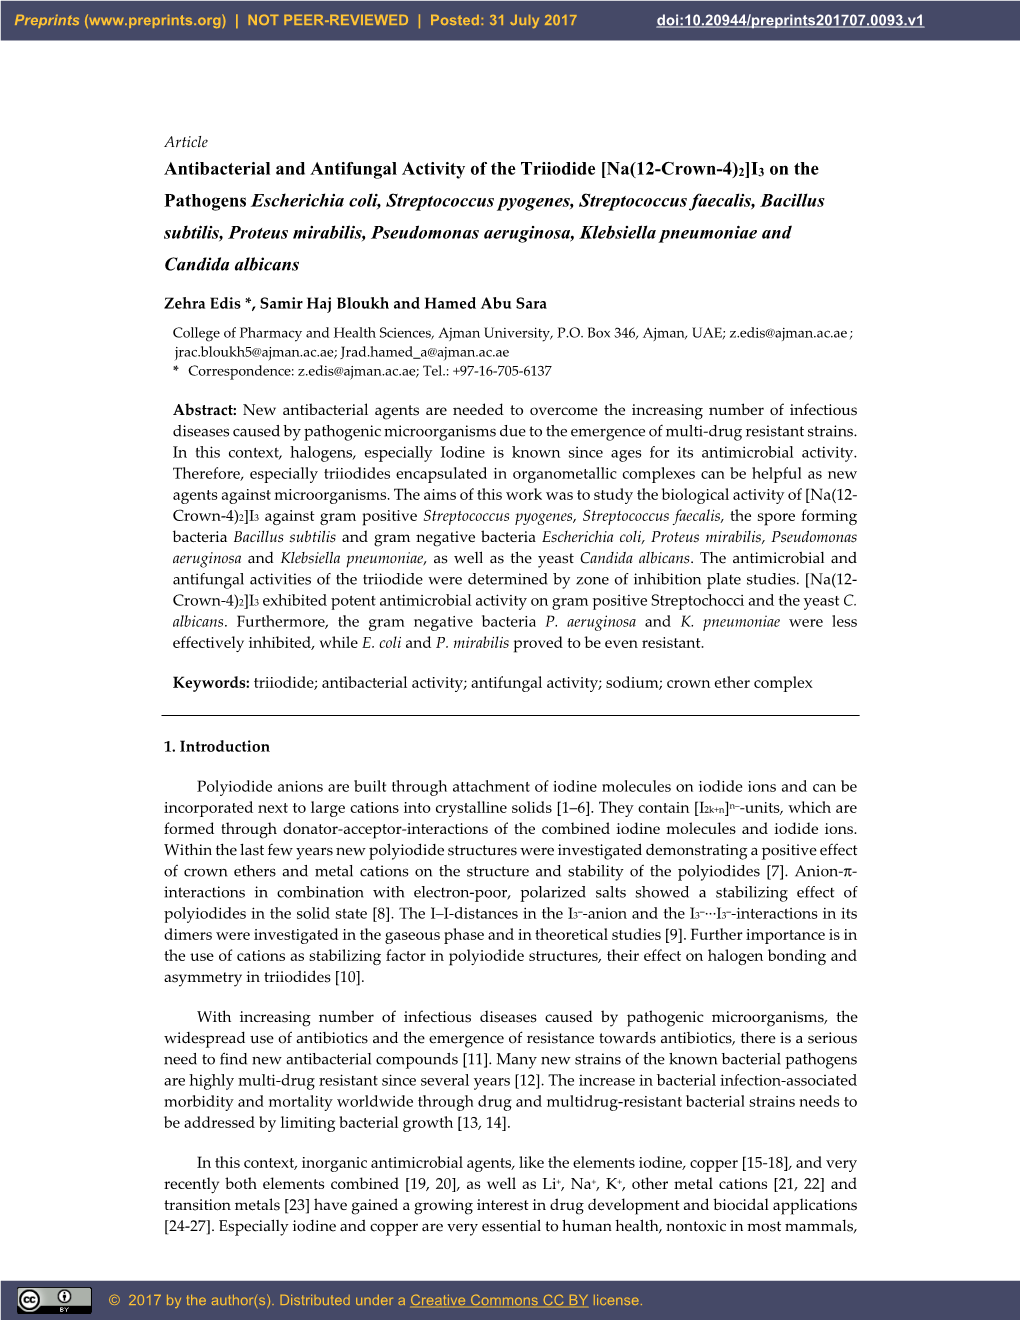 Antibacterial and Antifungal Activity of the Triiodide [Na(12-Crown-4)2]